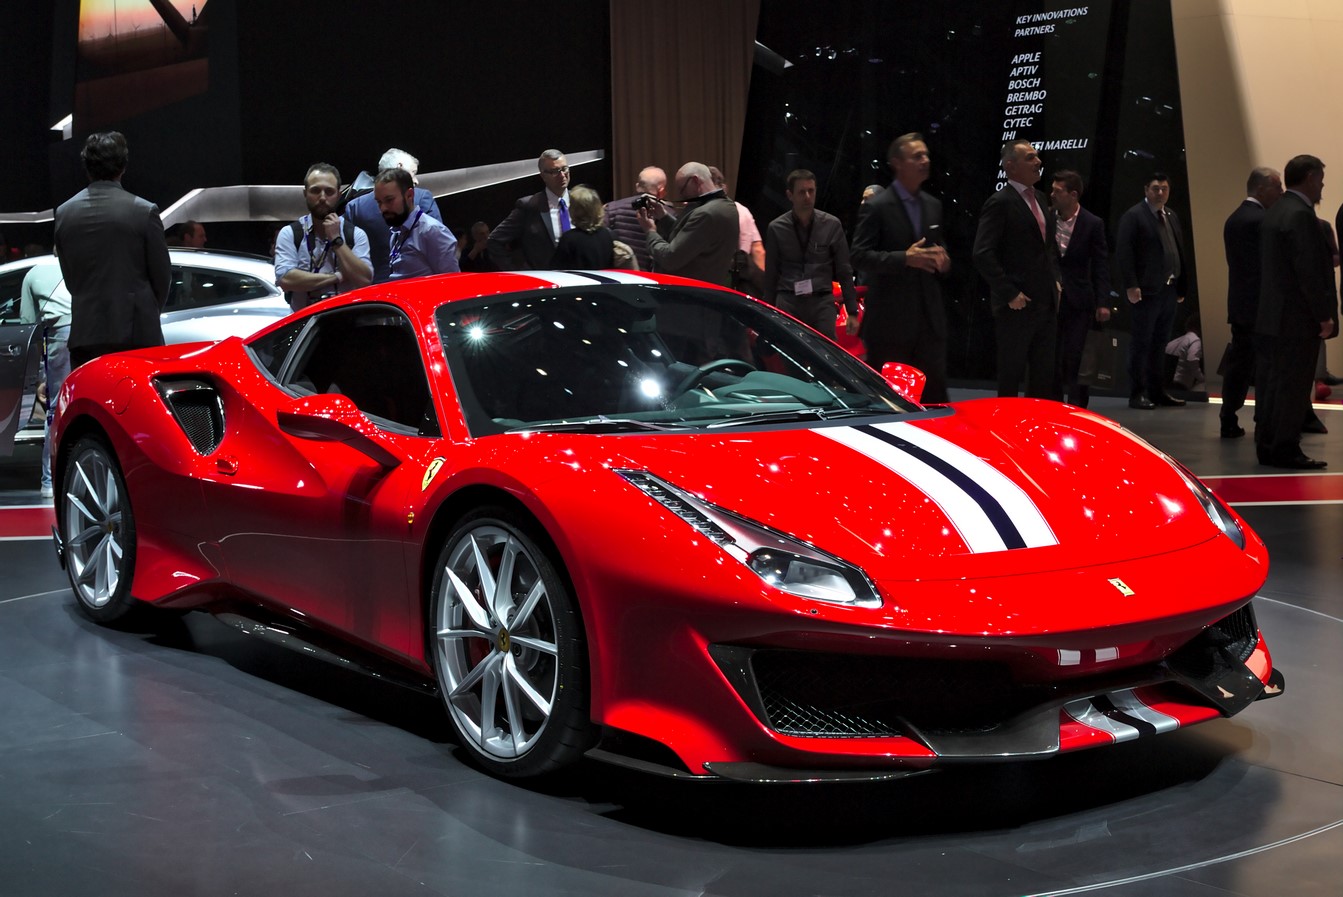 Best Ferrari concept cars available in the market - Sheet5